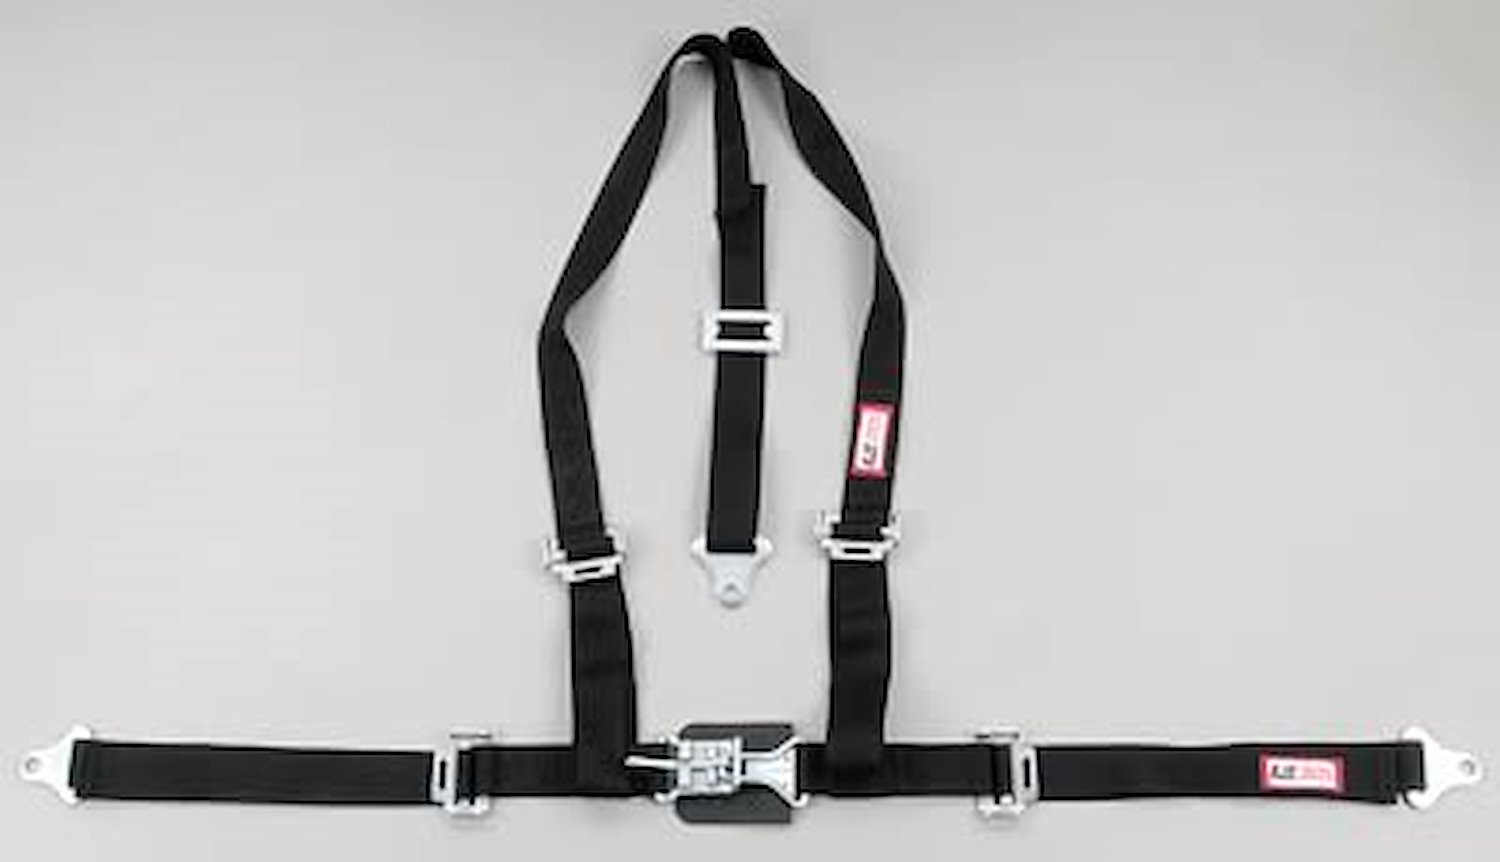 NON-SFI L&L HARNESS 3 PULL UP Lap BELT SEWN IN 2 S.H. Y FLOOR Mount w/STERNUM STRAP ALL WRAP ENDS GRAY